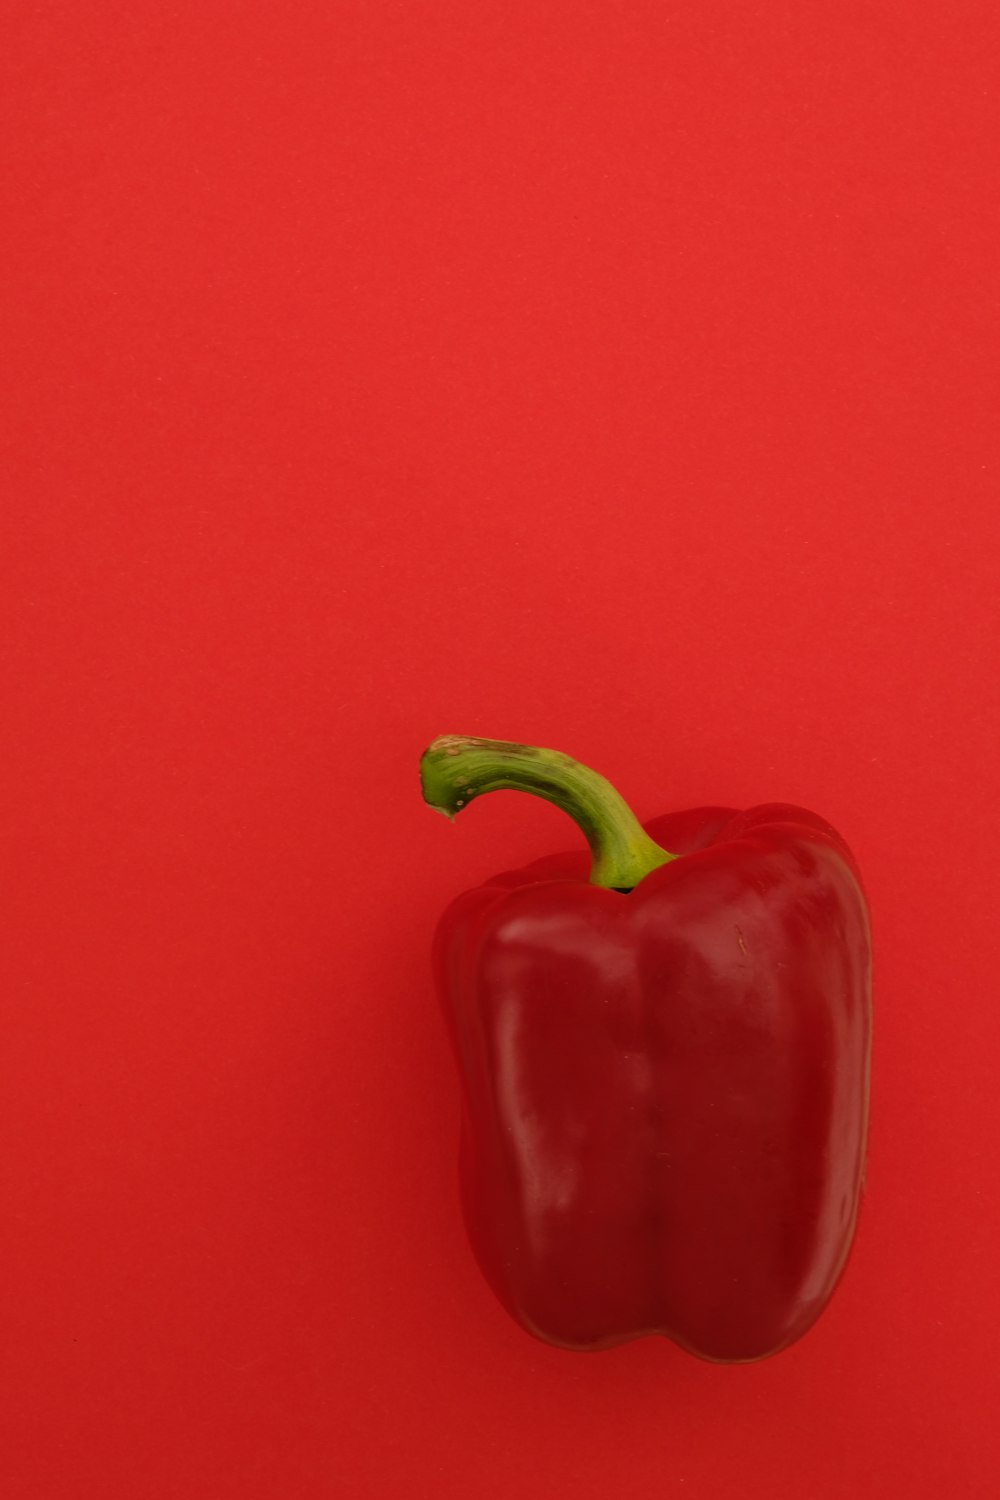 red bell pepper on red surface